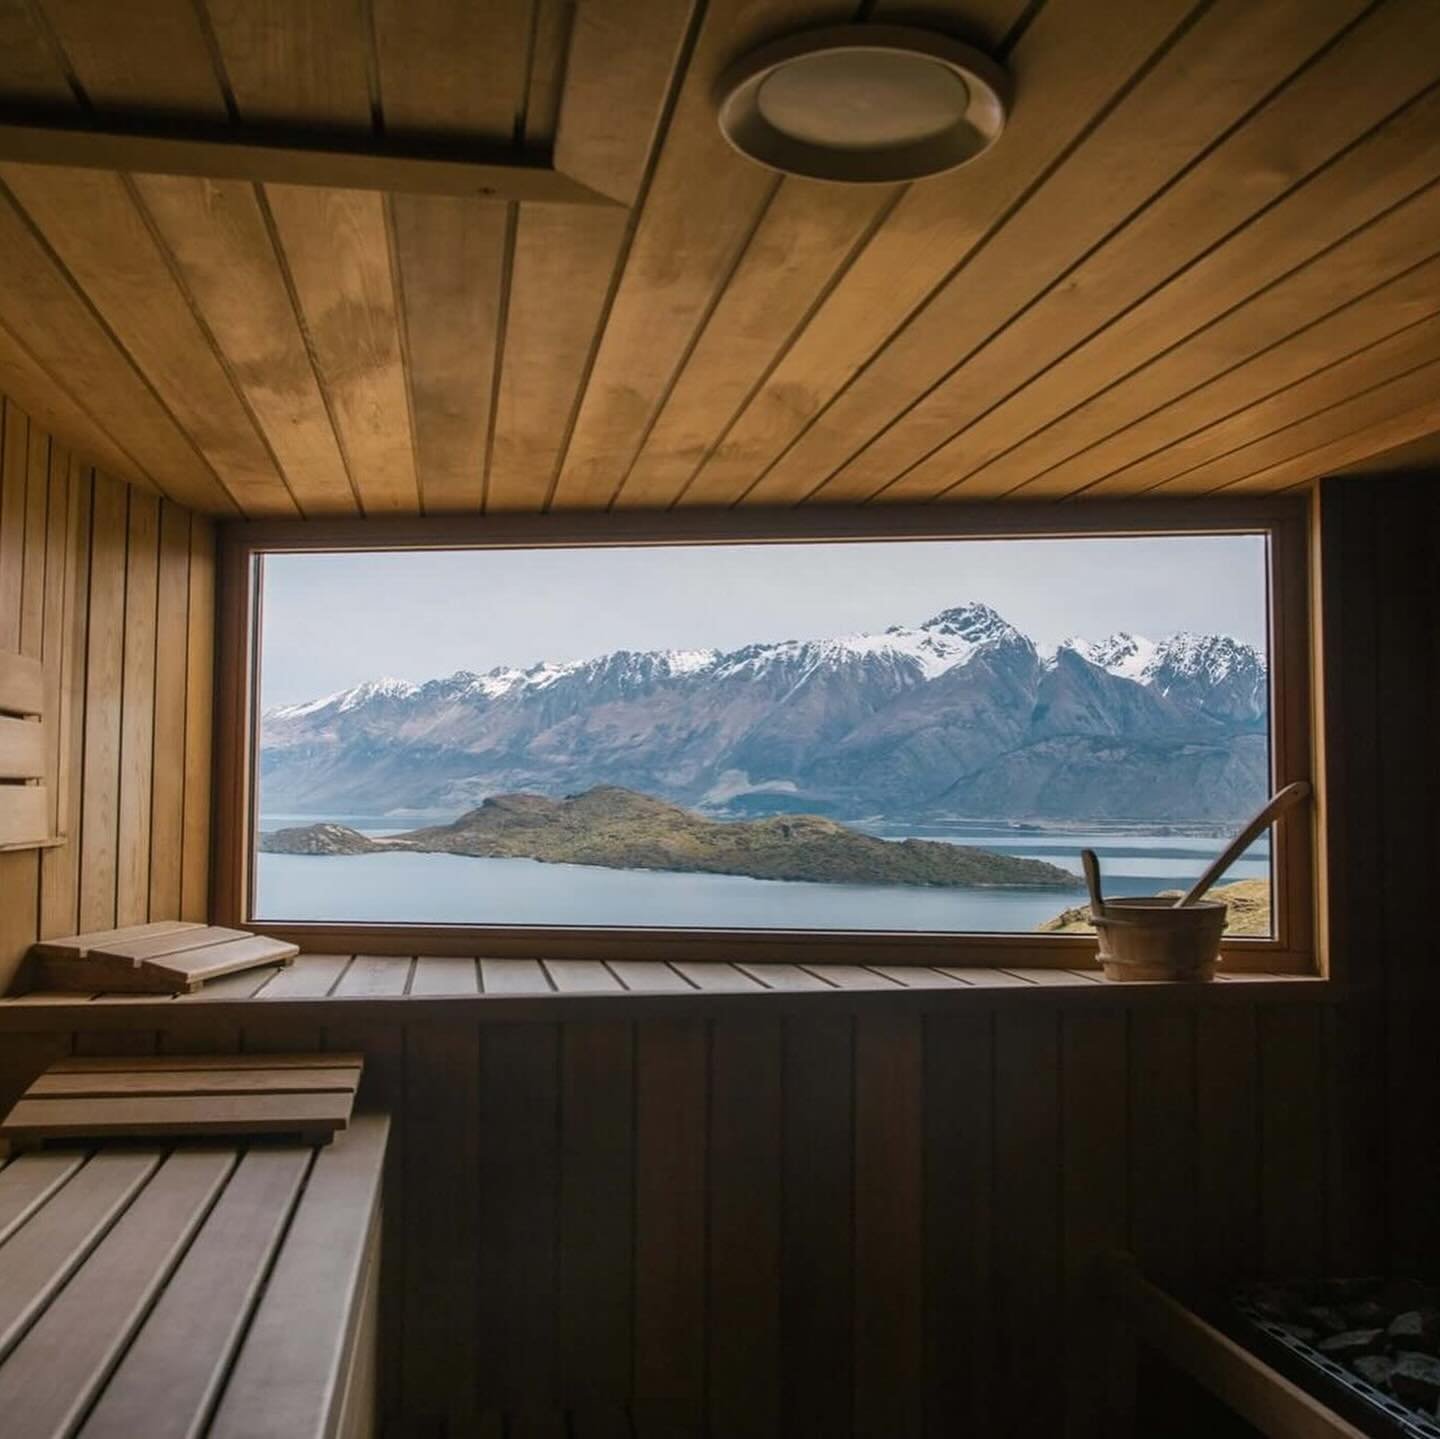 Aro Hā is a mind, body, and soul wellness experience on the shore of Lake Wakatipu in Glenorchy, New Zealand&rsquo;s majestic Southern Alps.

The retreat has been constructed from larch wood and local stone, with minimal impact to the environment, ru